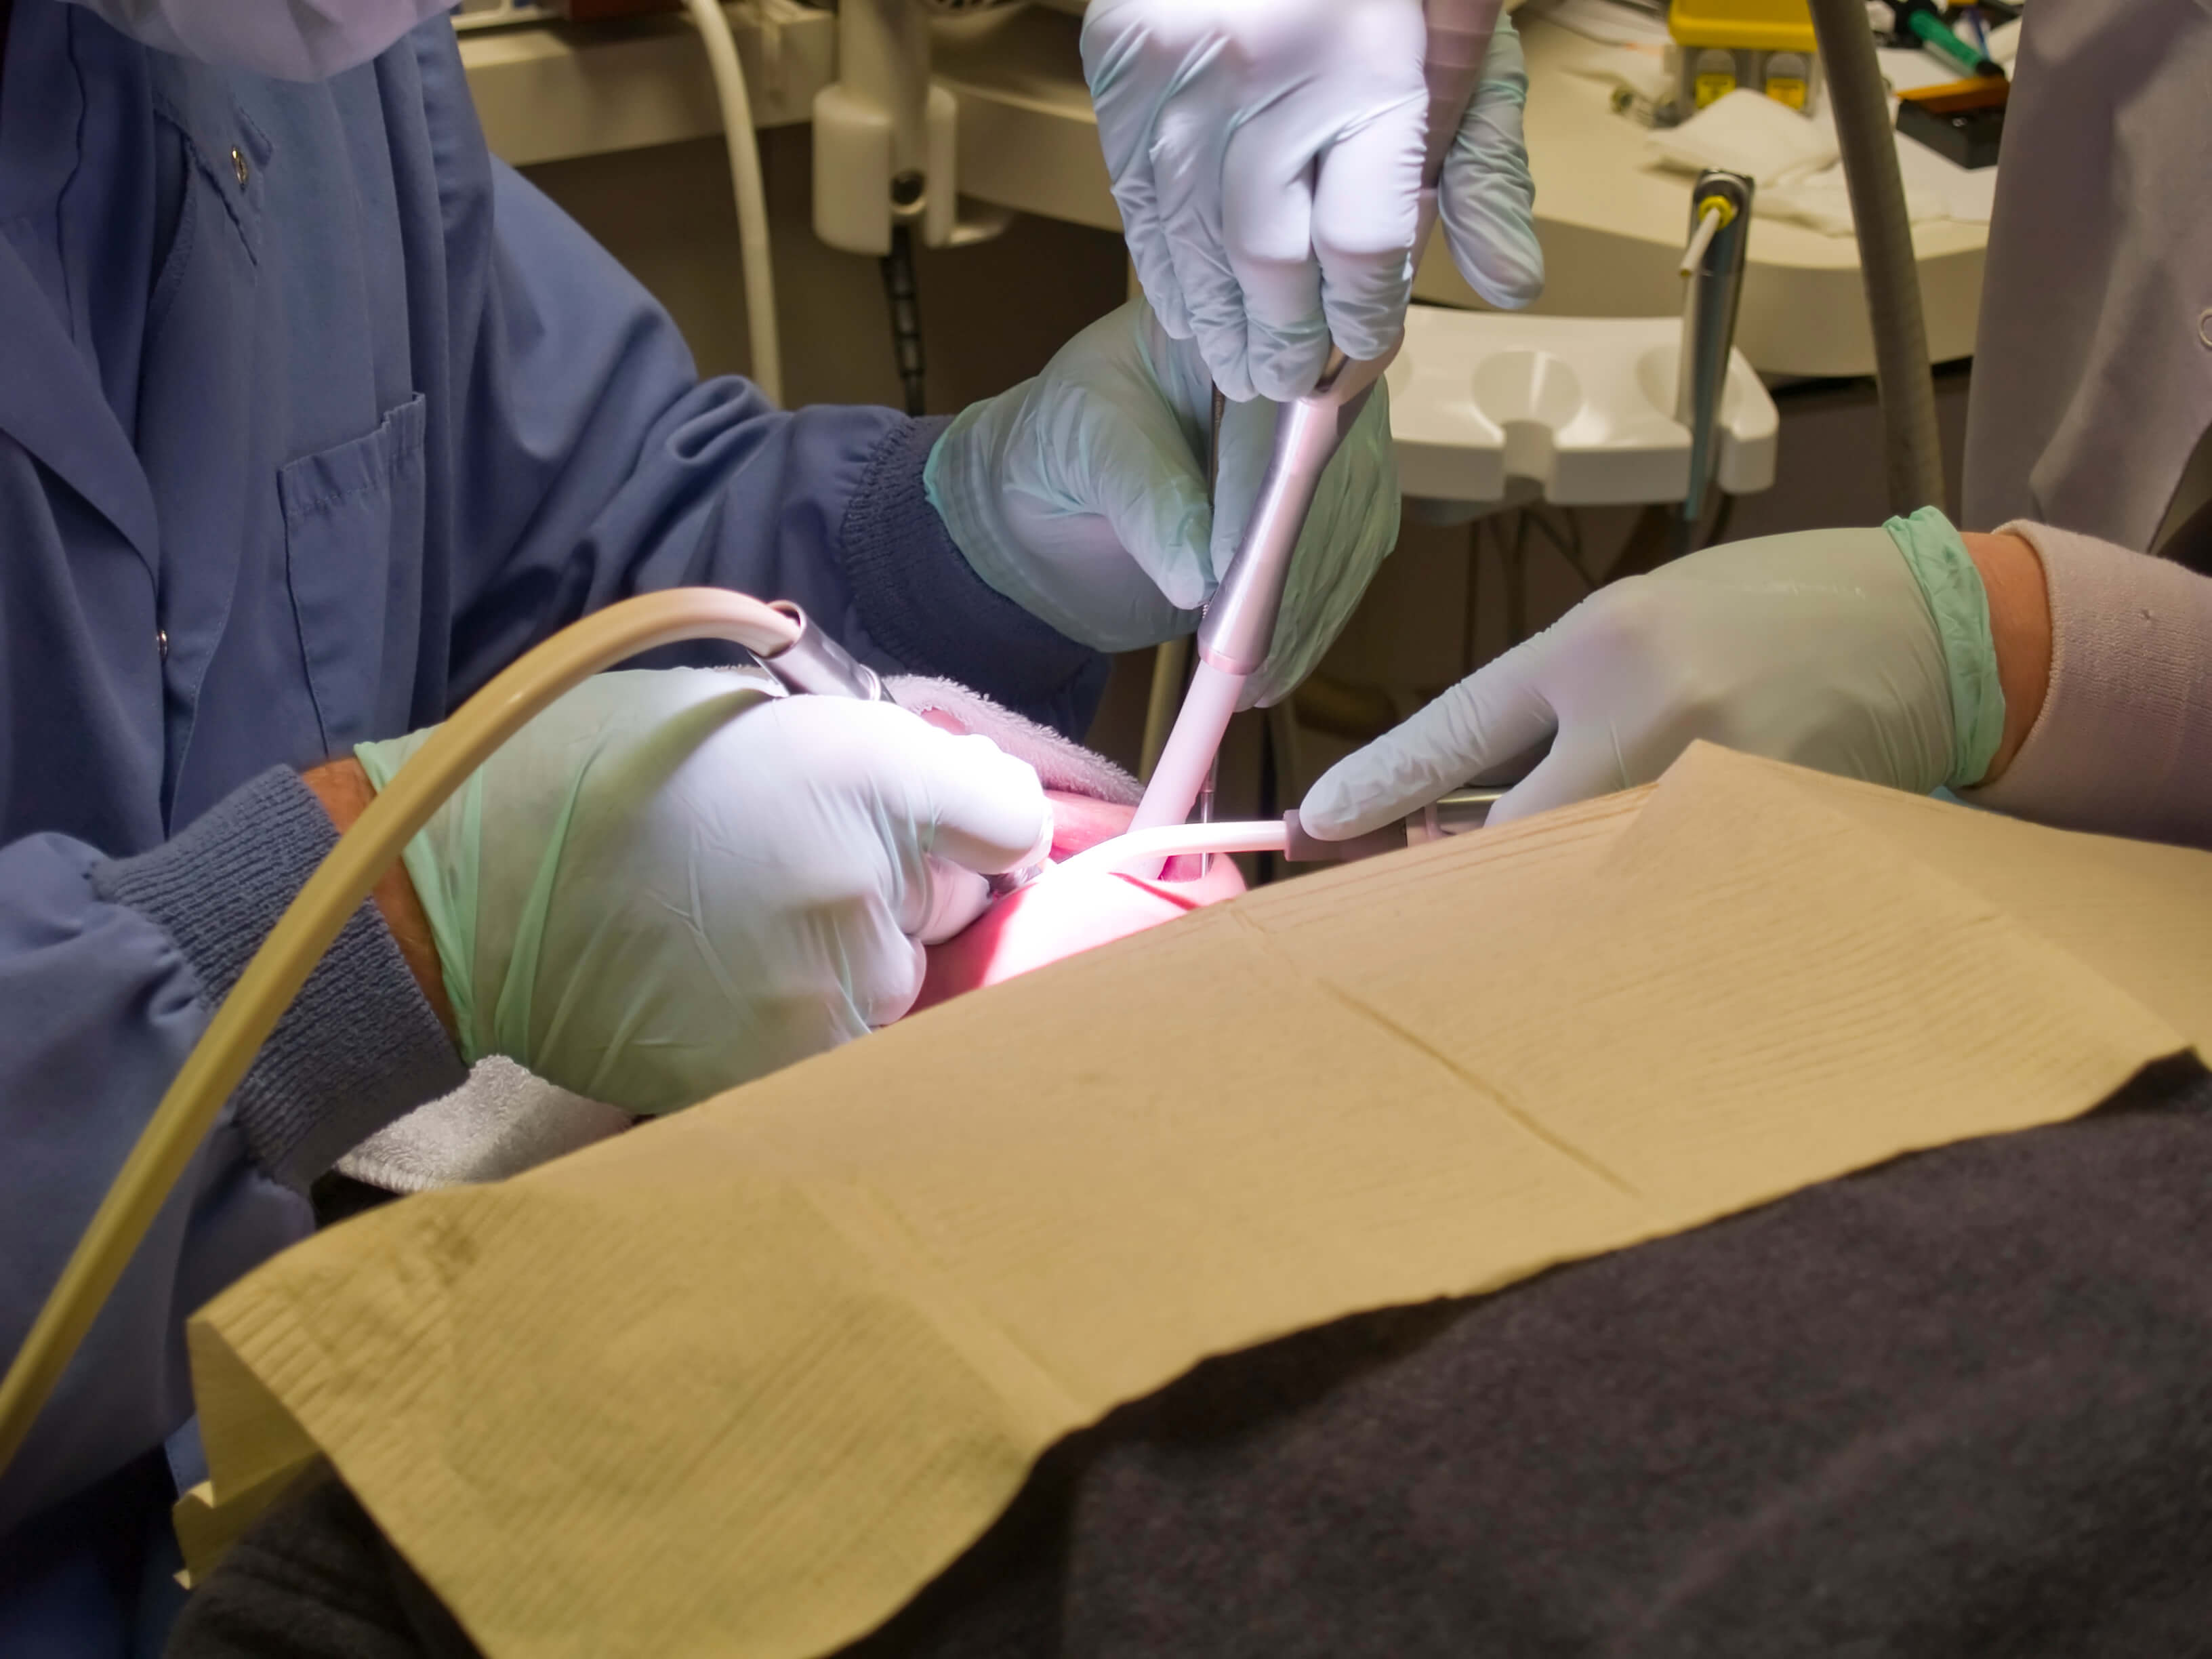 A woman undergoes a root canal at the dentist. The doctor's hands are wielding the drill and pick, and the assistant is keeping the site irrigated.